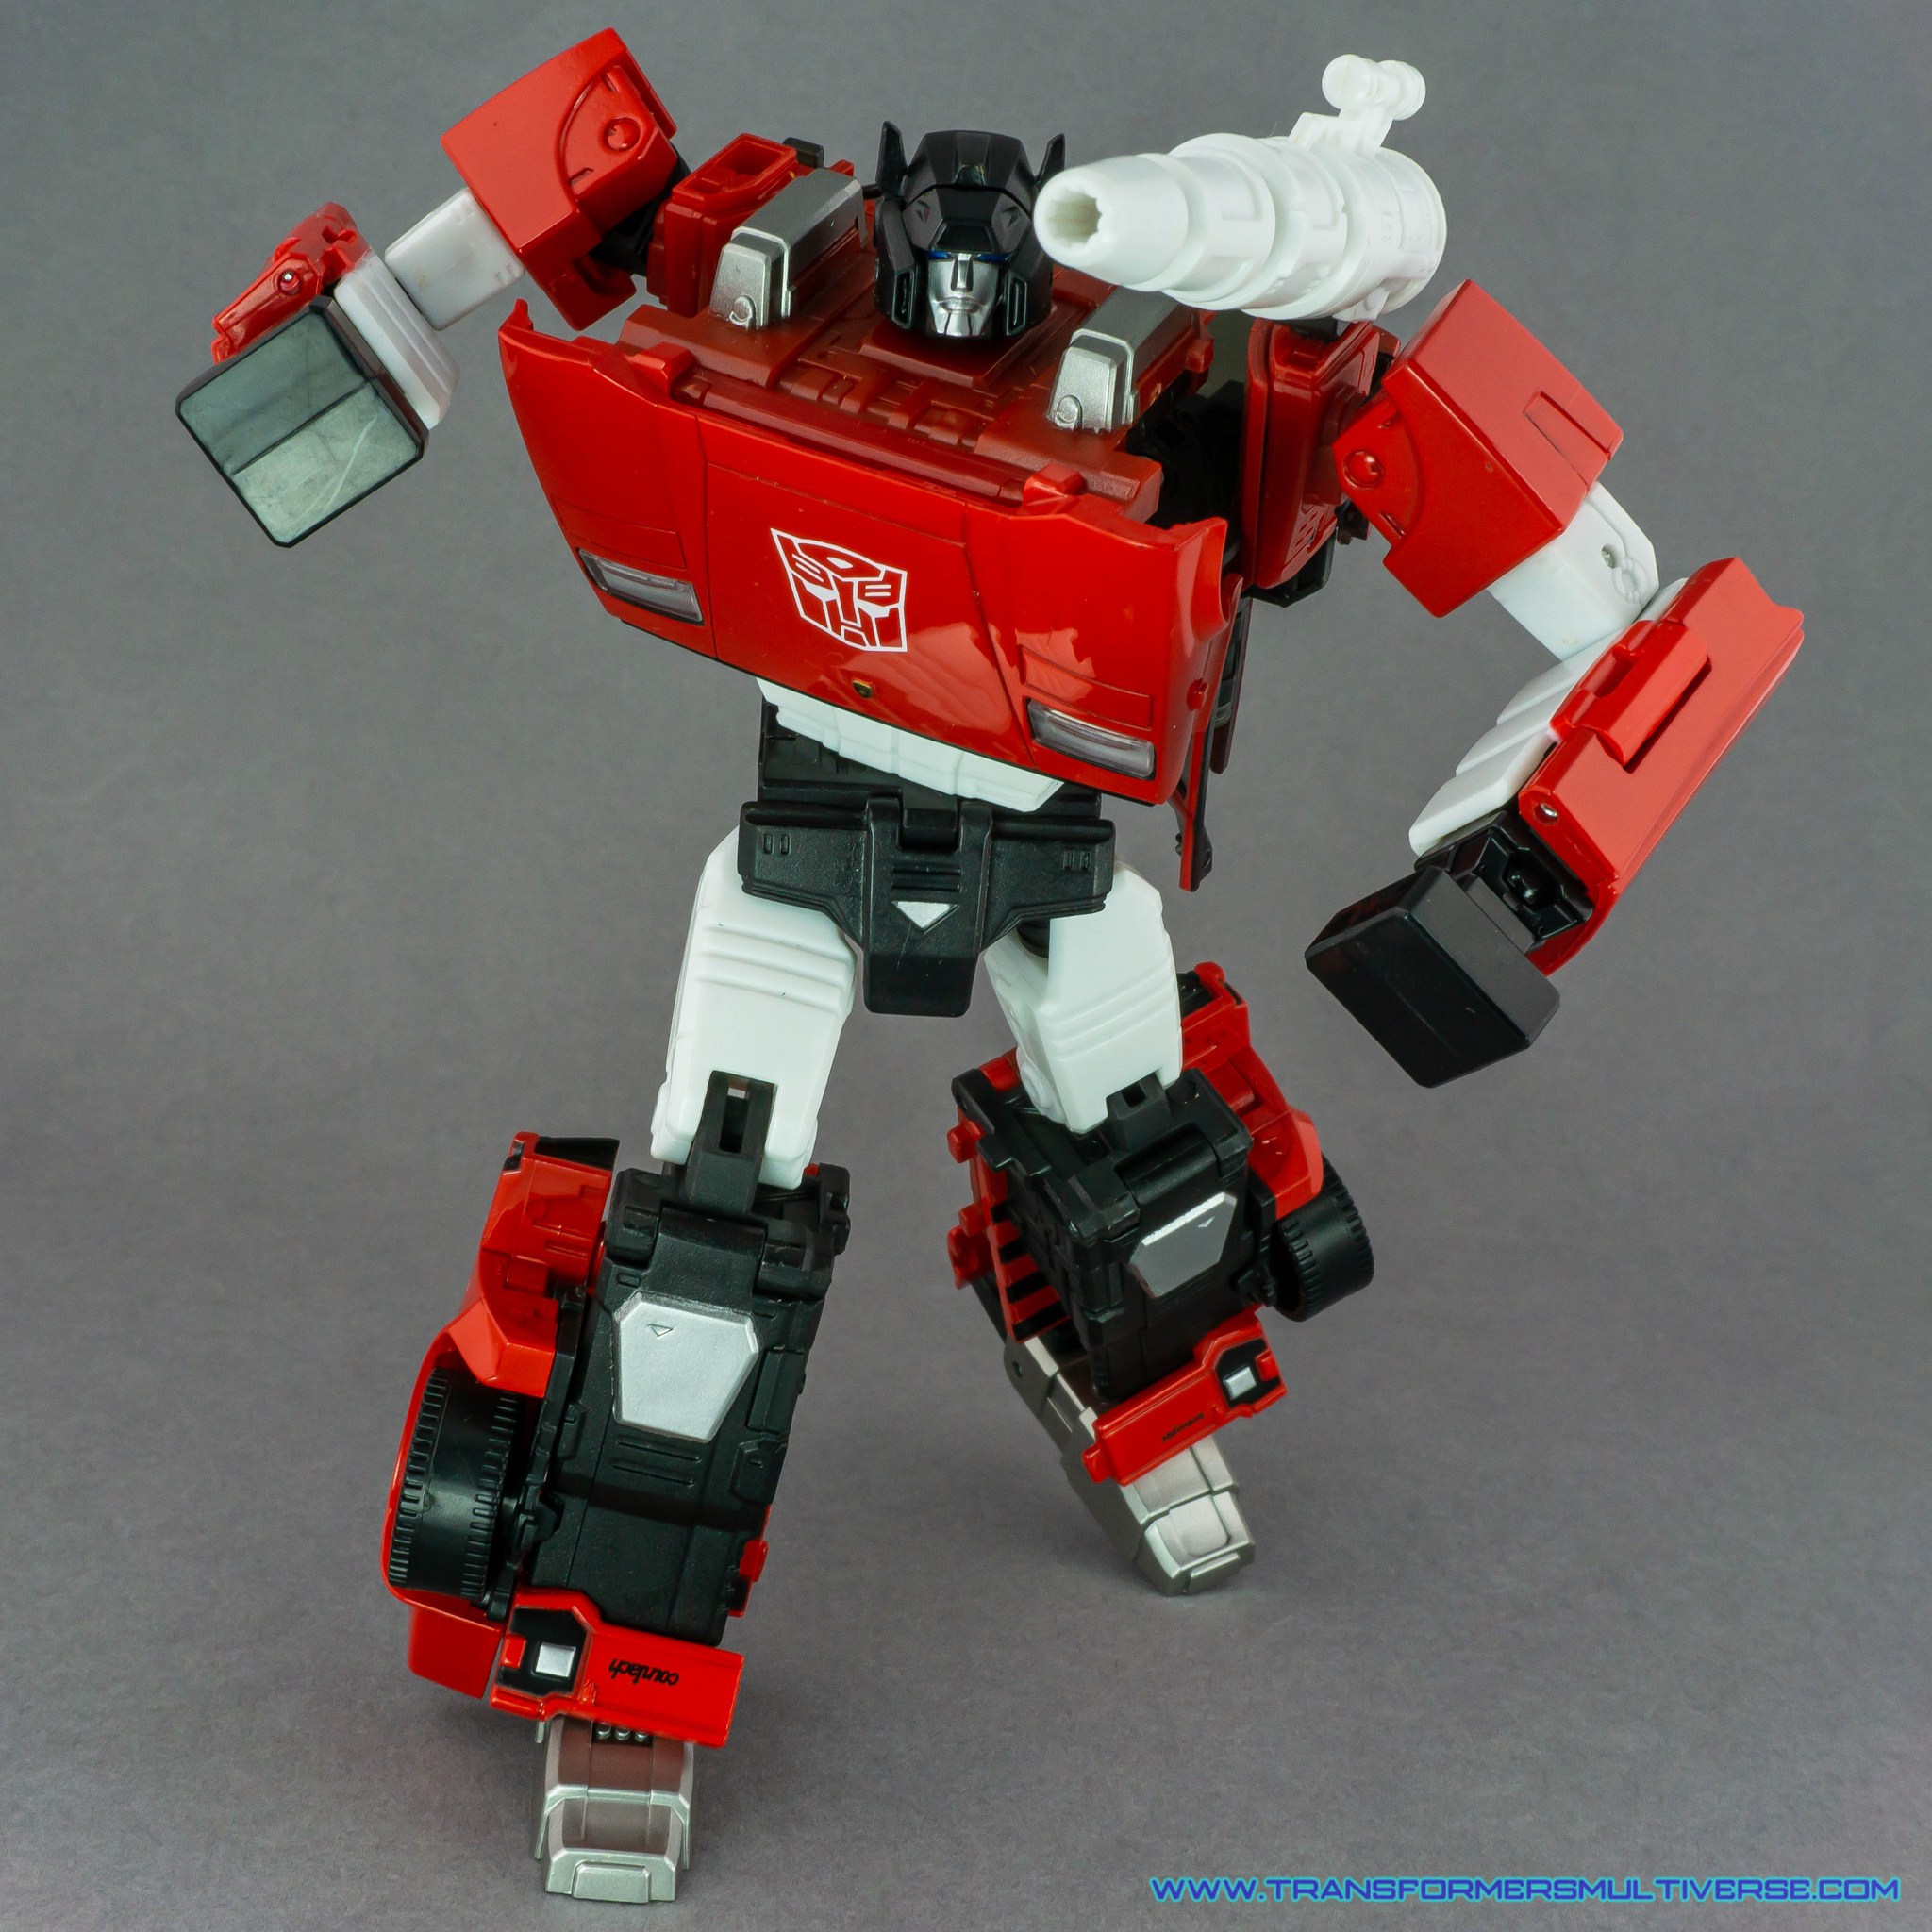 Transformers Masterpiece Sideswipe with piledrivers attached